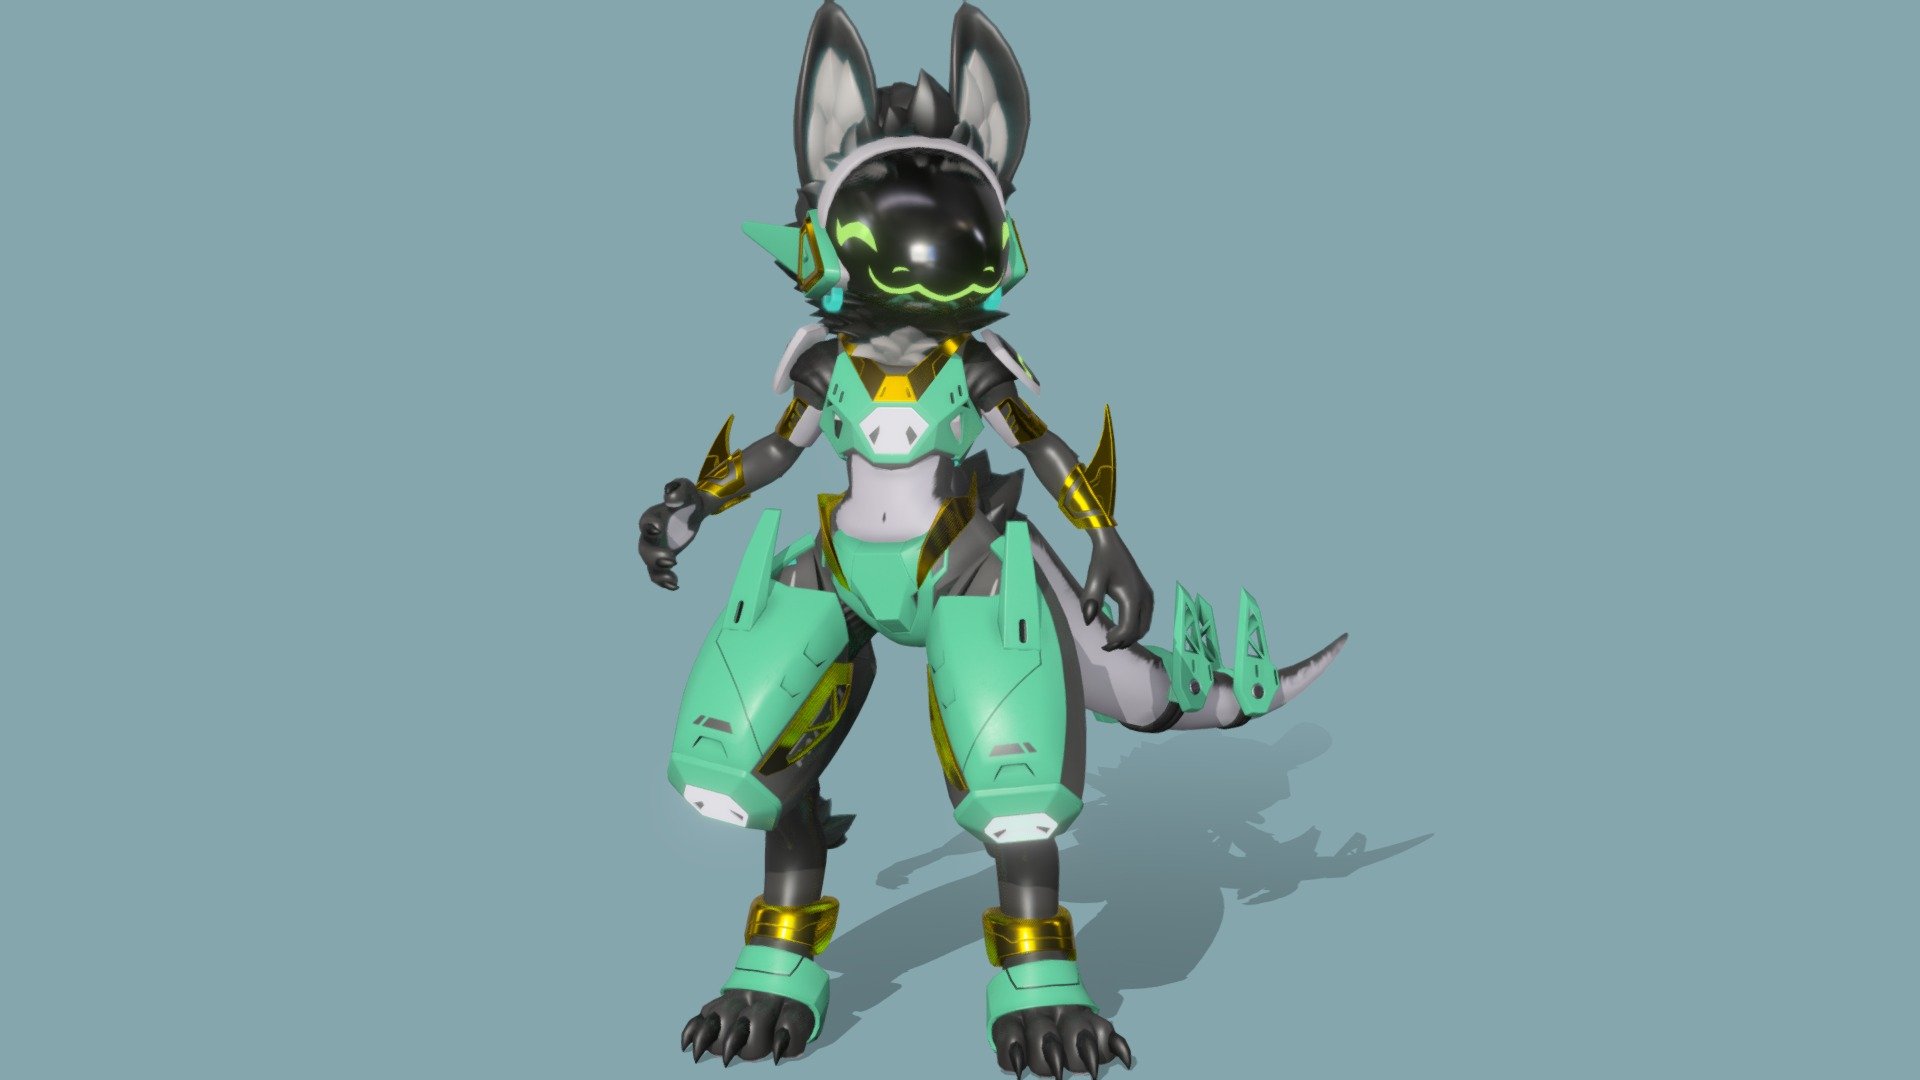 Exploring images in the style of selected image: [Other Protogen